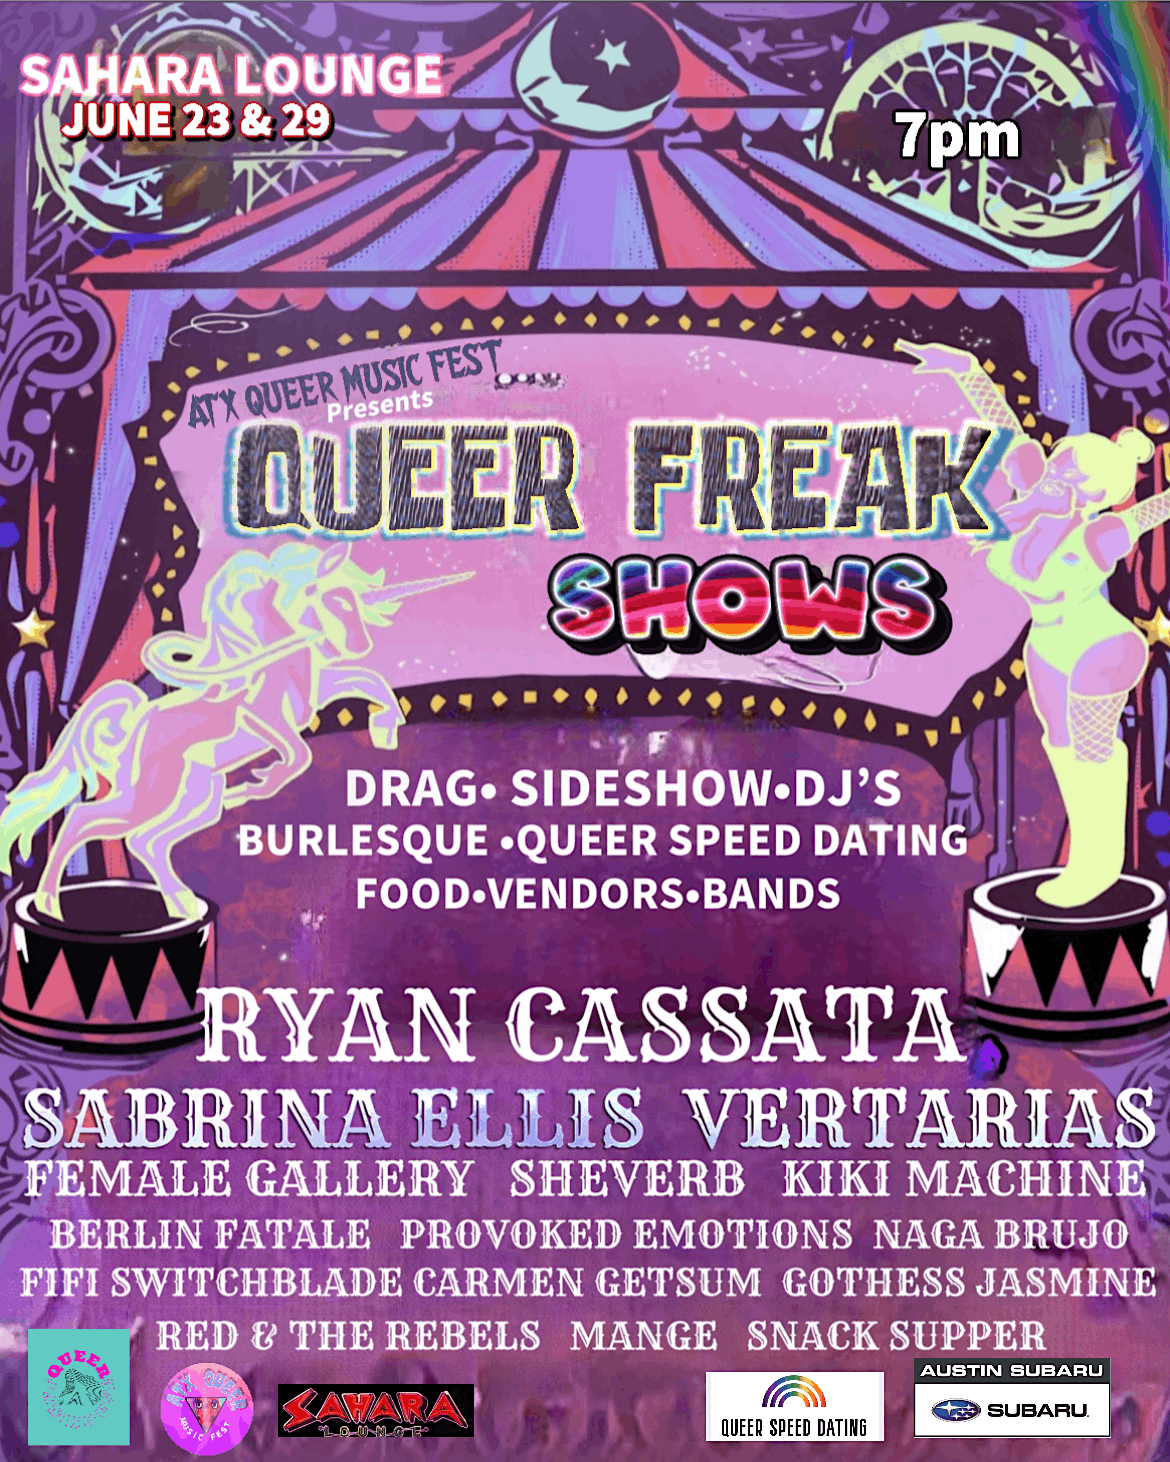 QUEER PRIDE FREAK SHOWS presented by ATX Queer Music Fest